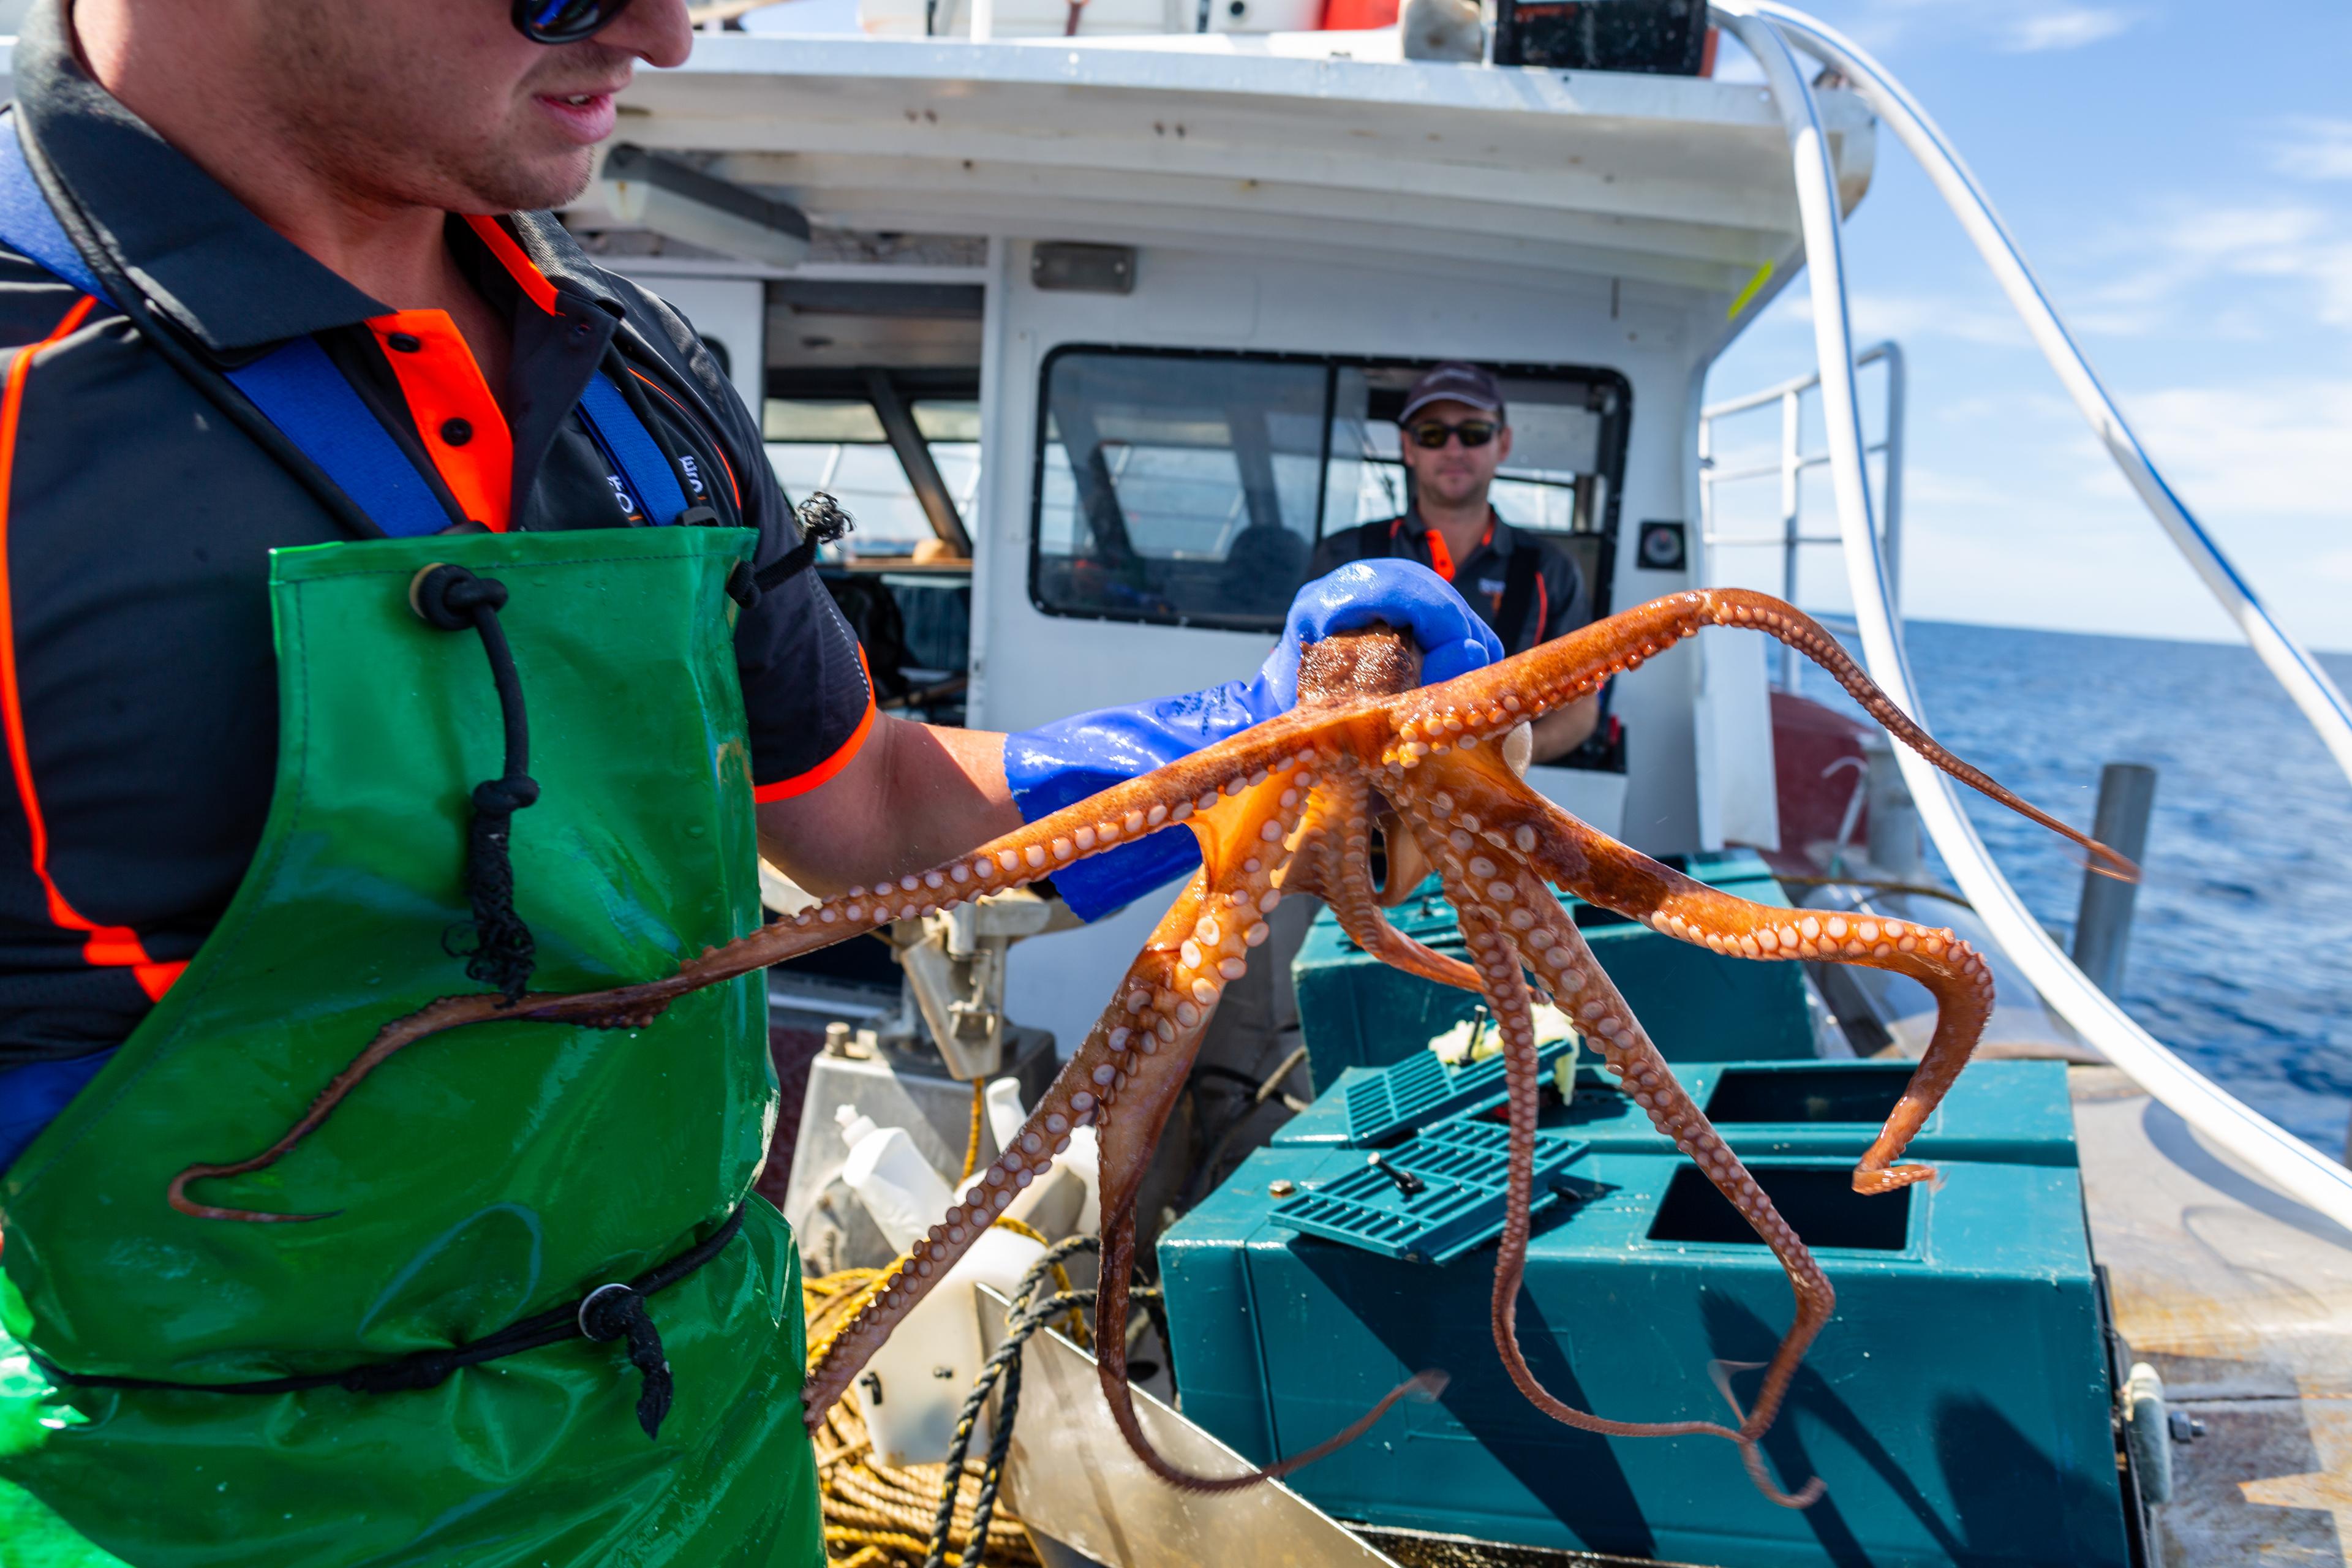 Worker holding a live octopus on a Fremantle Octopus boat.